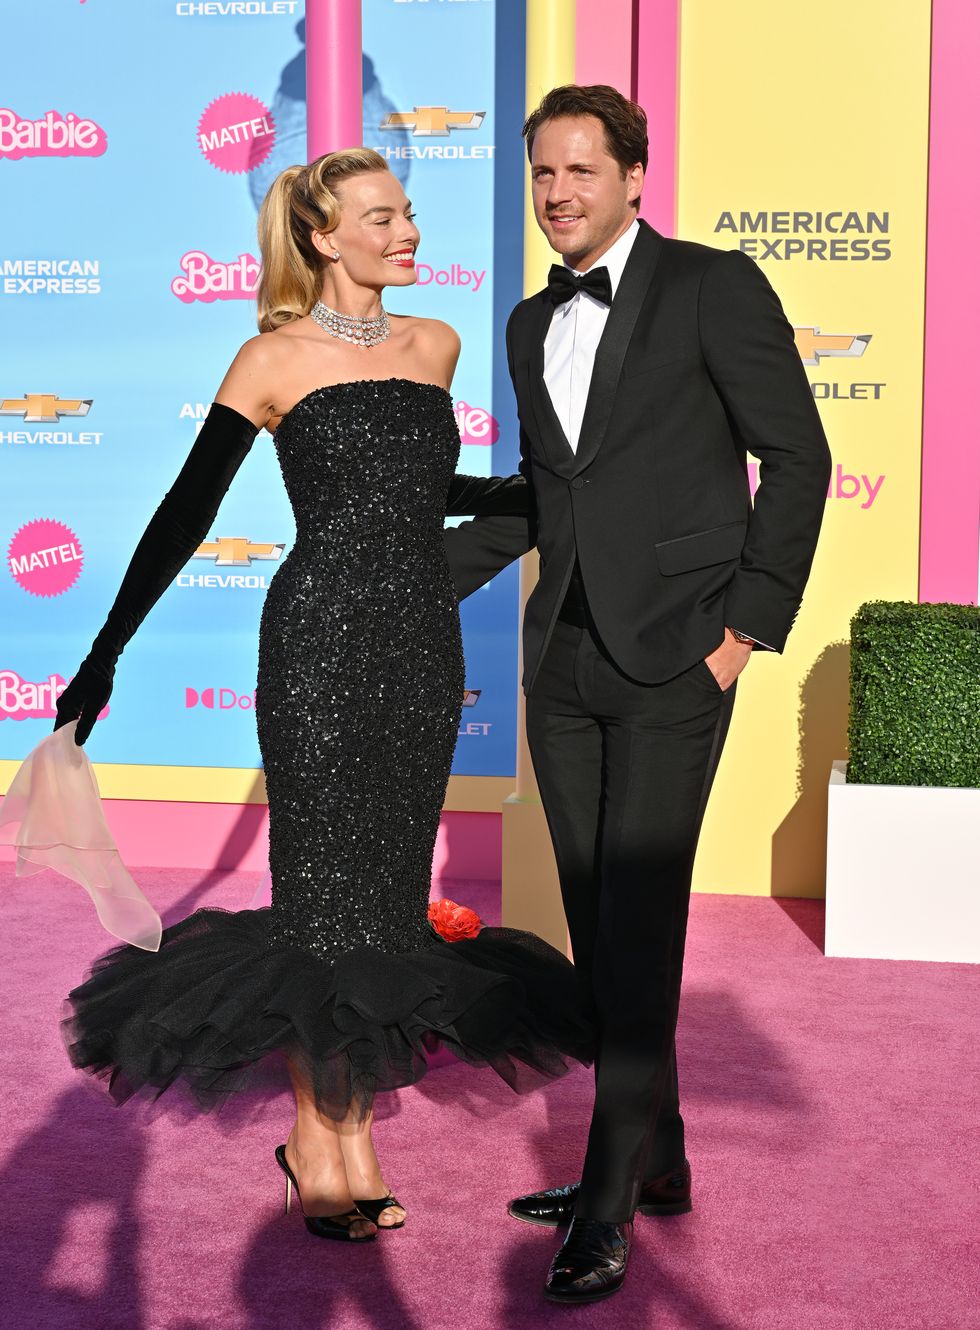 los angeles, california july 09 margot robbie and tom ackerley attend the world premiere of barbie at shrine auditorium and expo hall on july 09, 2023 in los angeles, california photo by axellebauer griffinfilmmagic